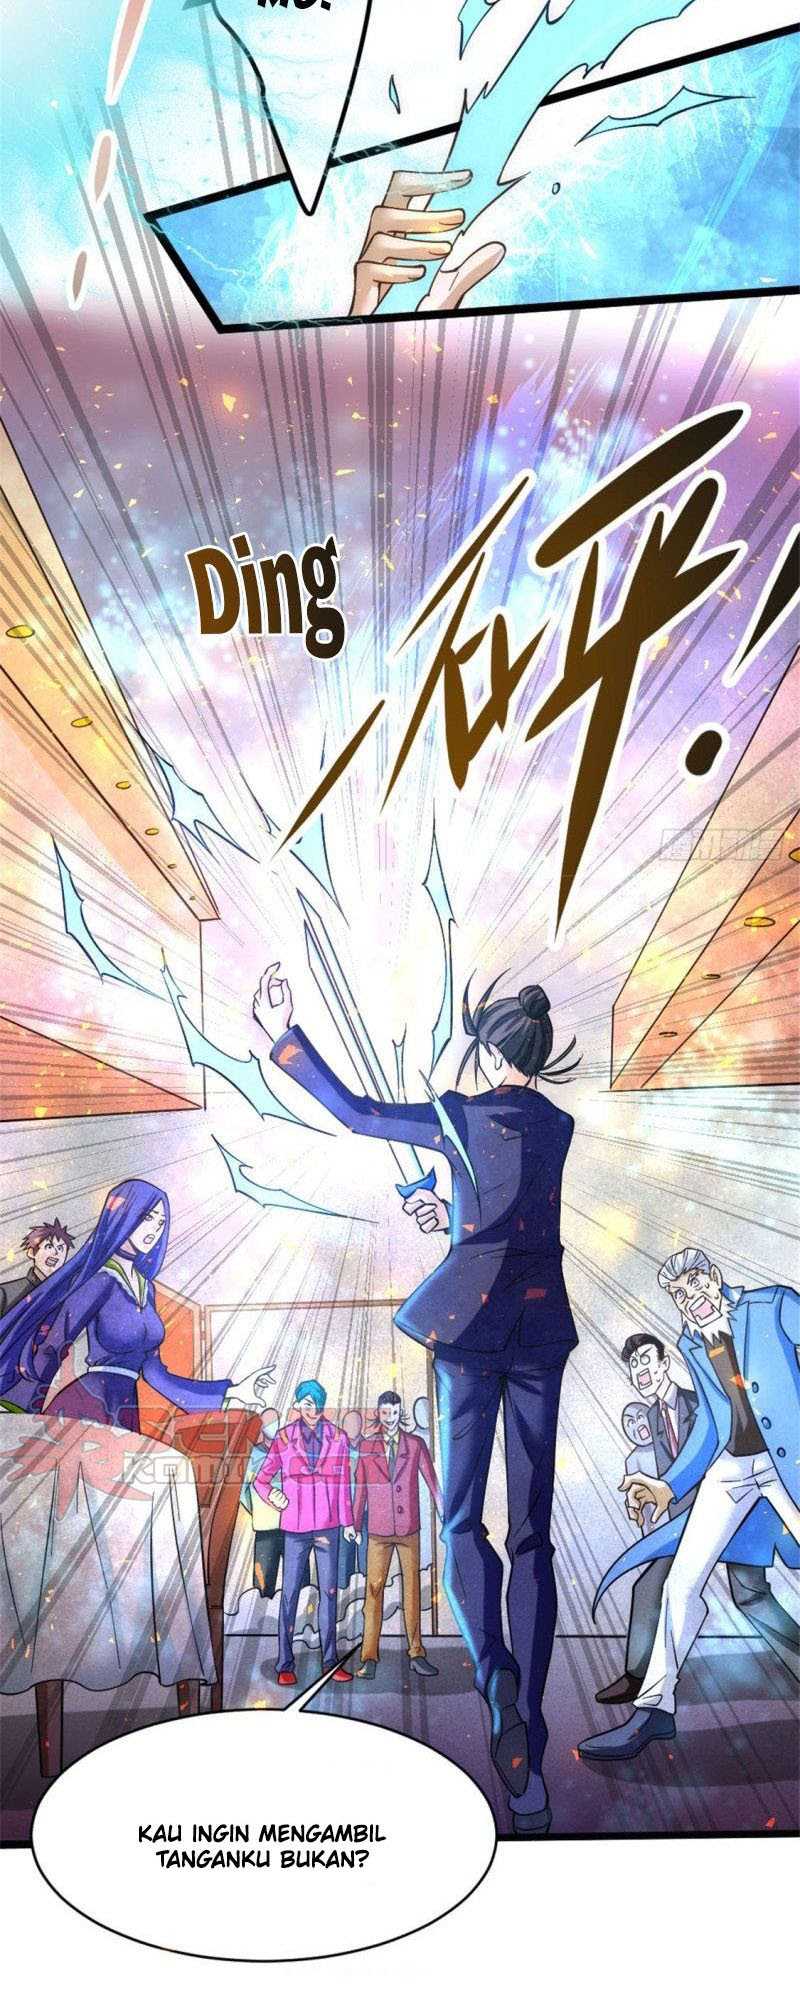 Almighty Master Chapter 68